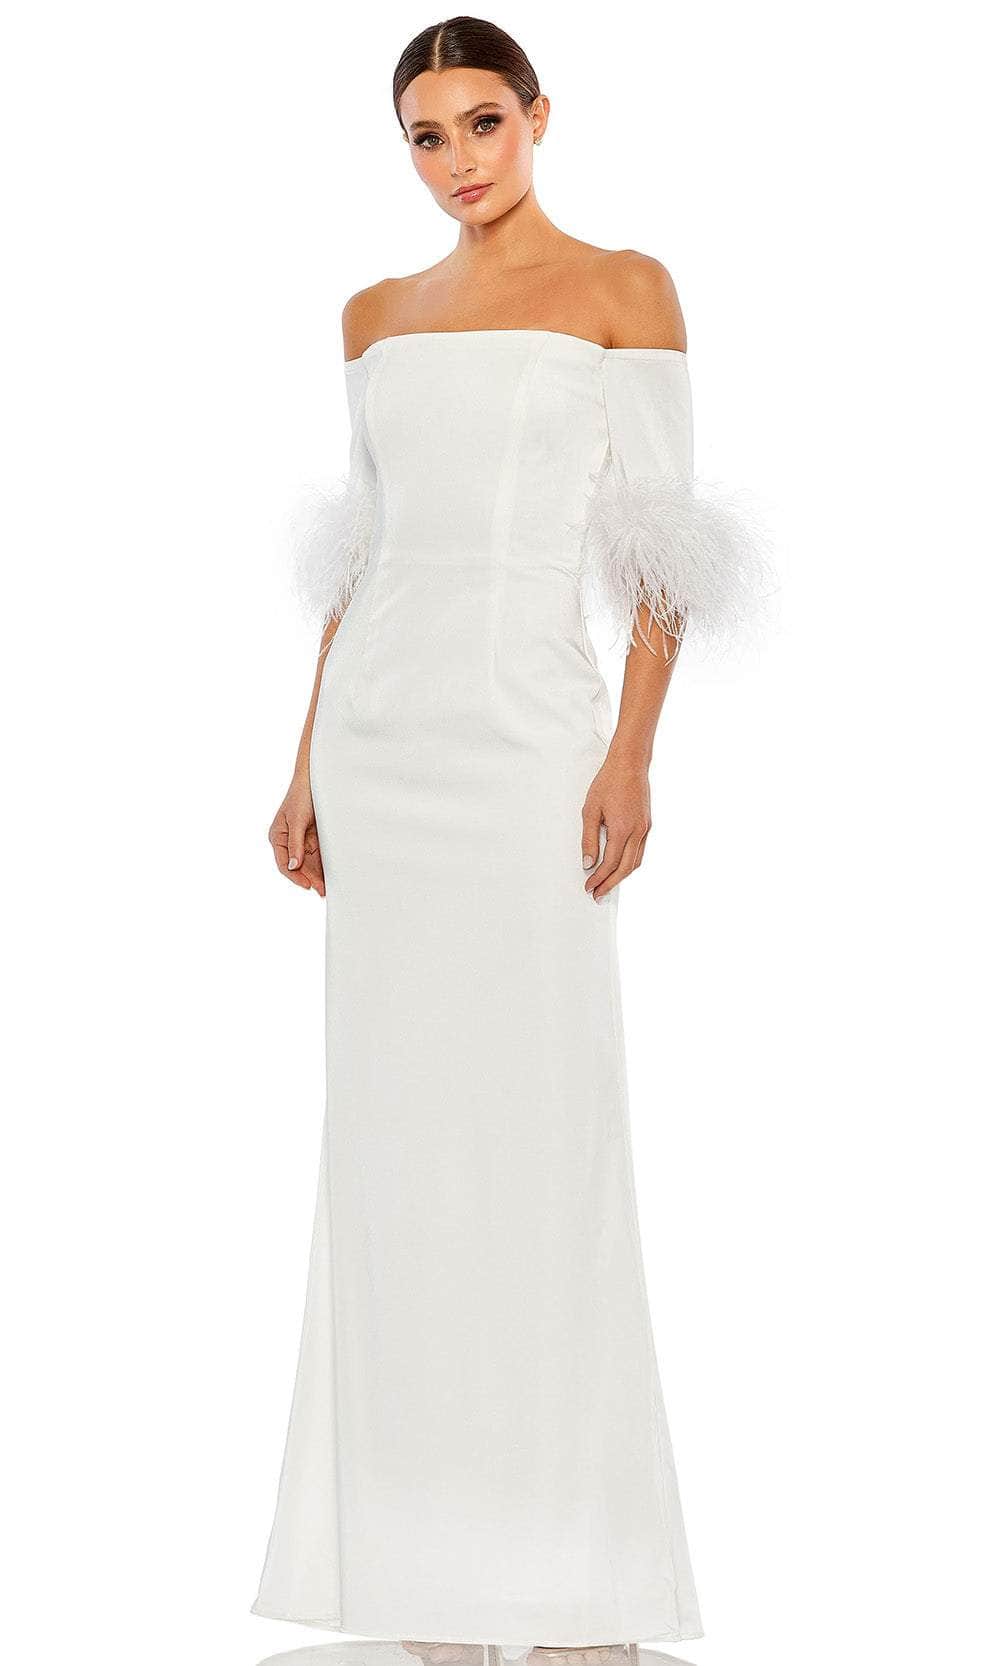 Ieena Duggal 11441 - Fringed Sleeve Sheath Evening Gown Special Occasion Dress 2 / White